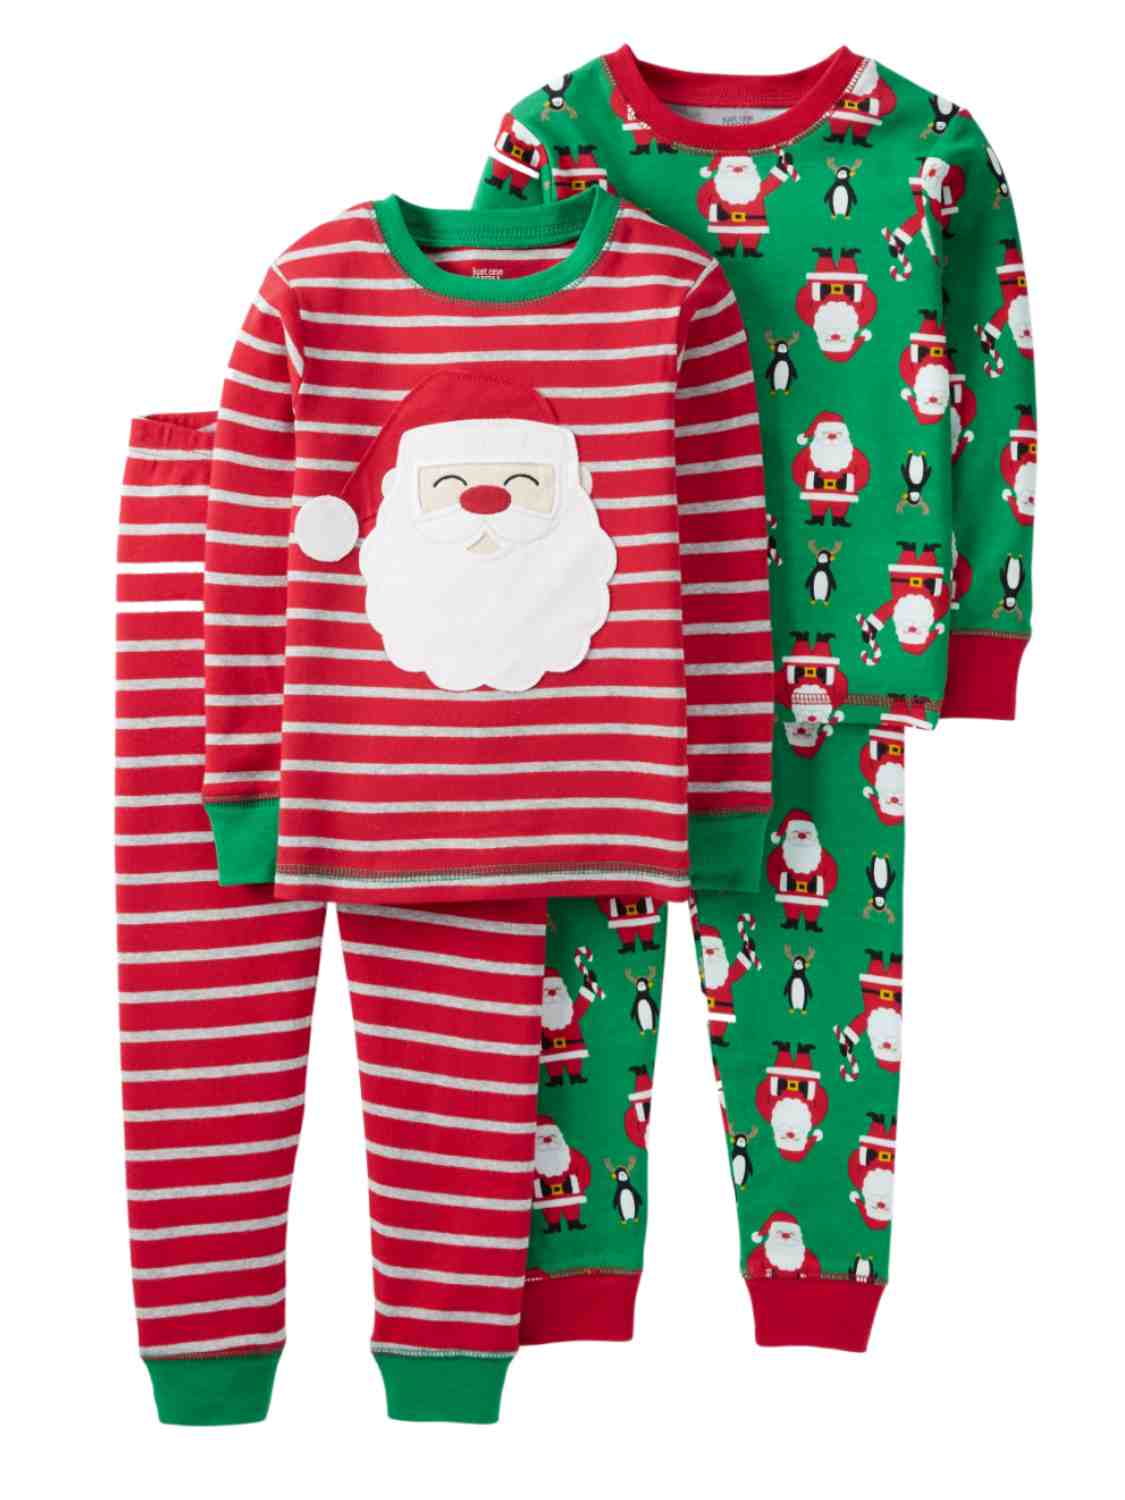 NWT Baby/Toddler Boys' Santa's Sidekick 2pc Pajama Set Just One You by Carter's 